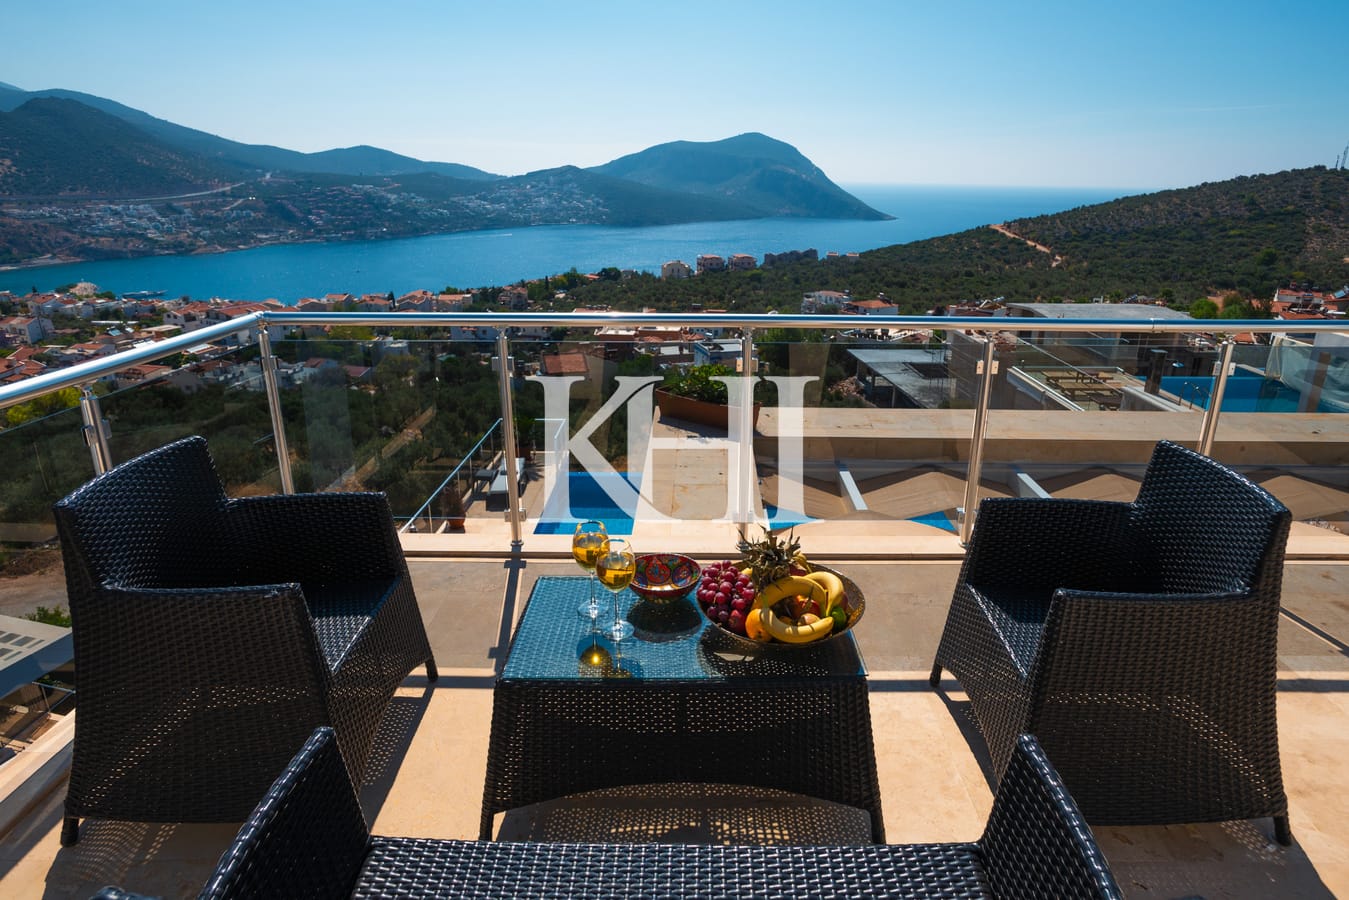 Detached Villa For Sale With Panoramic Kalkan View Slide Image 33